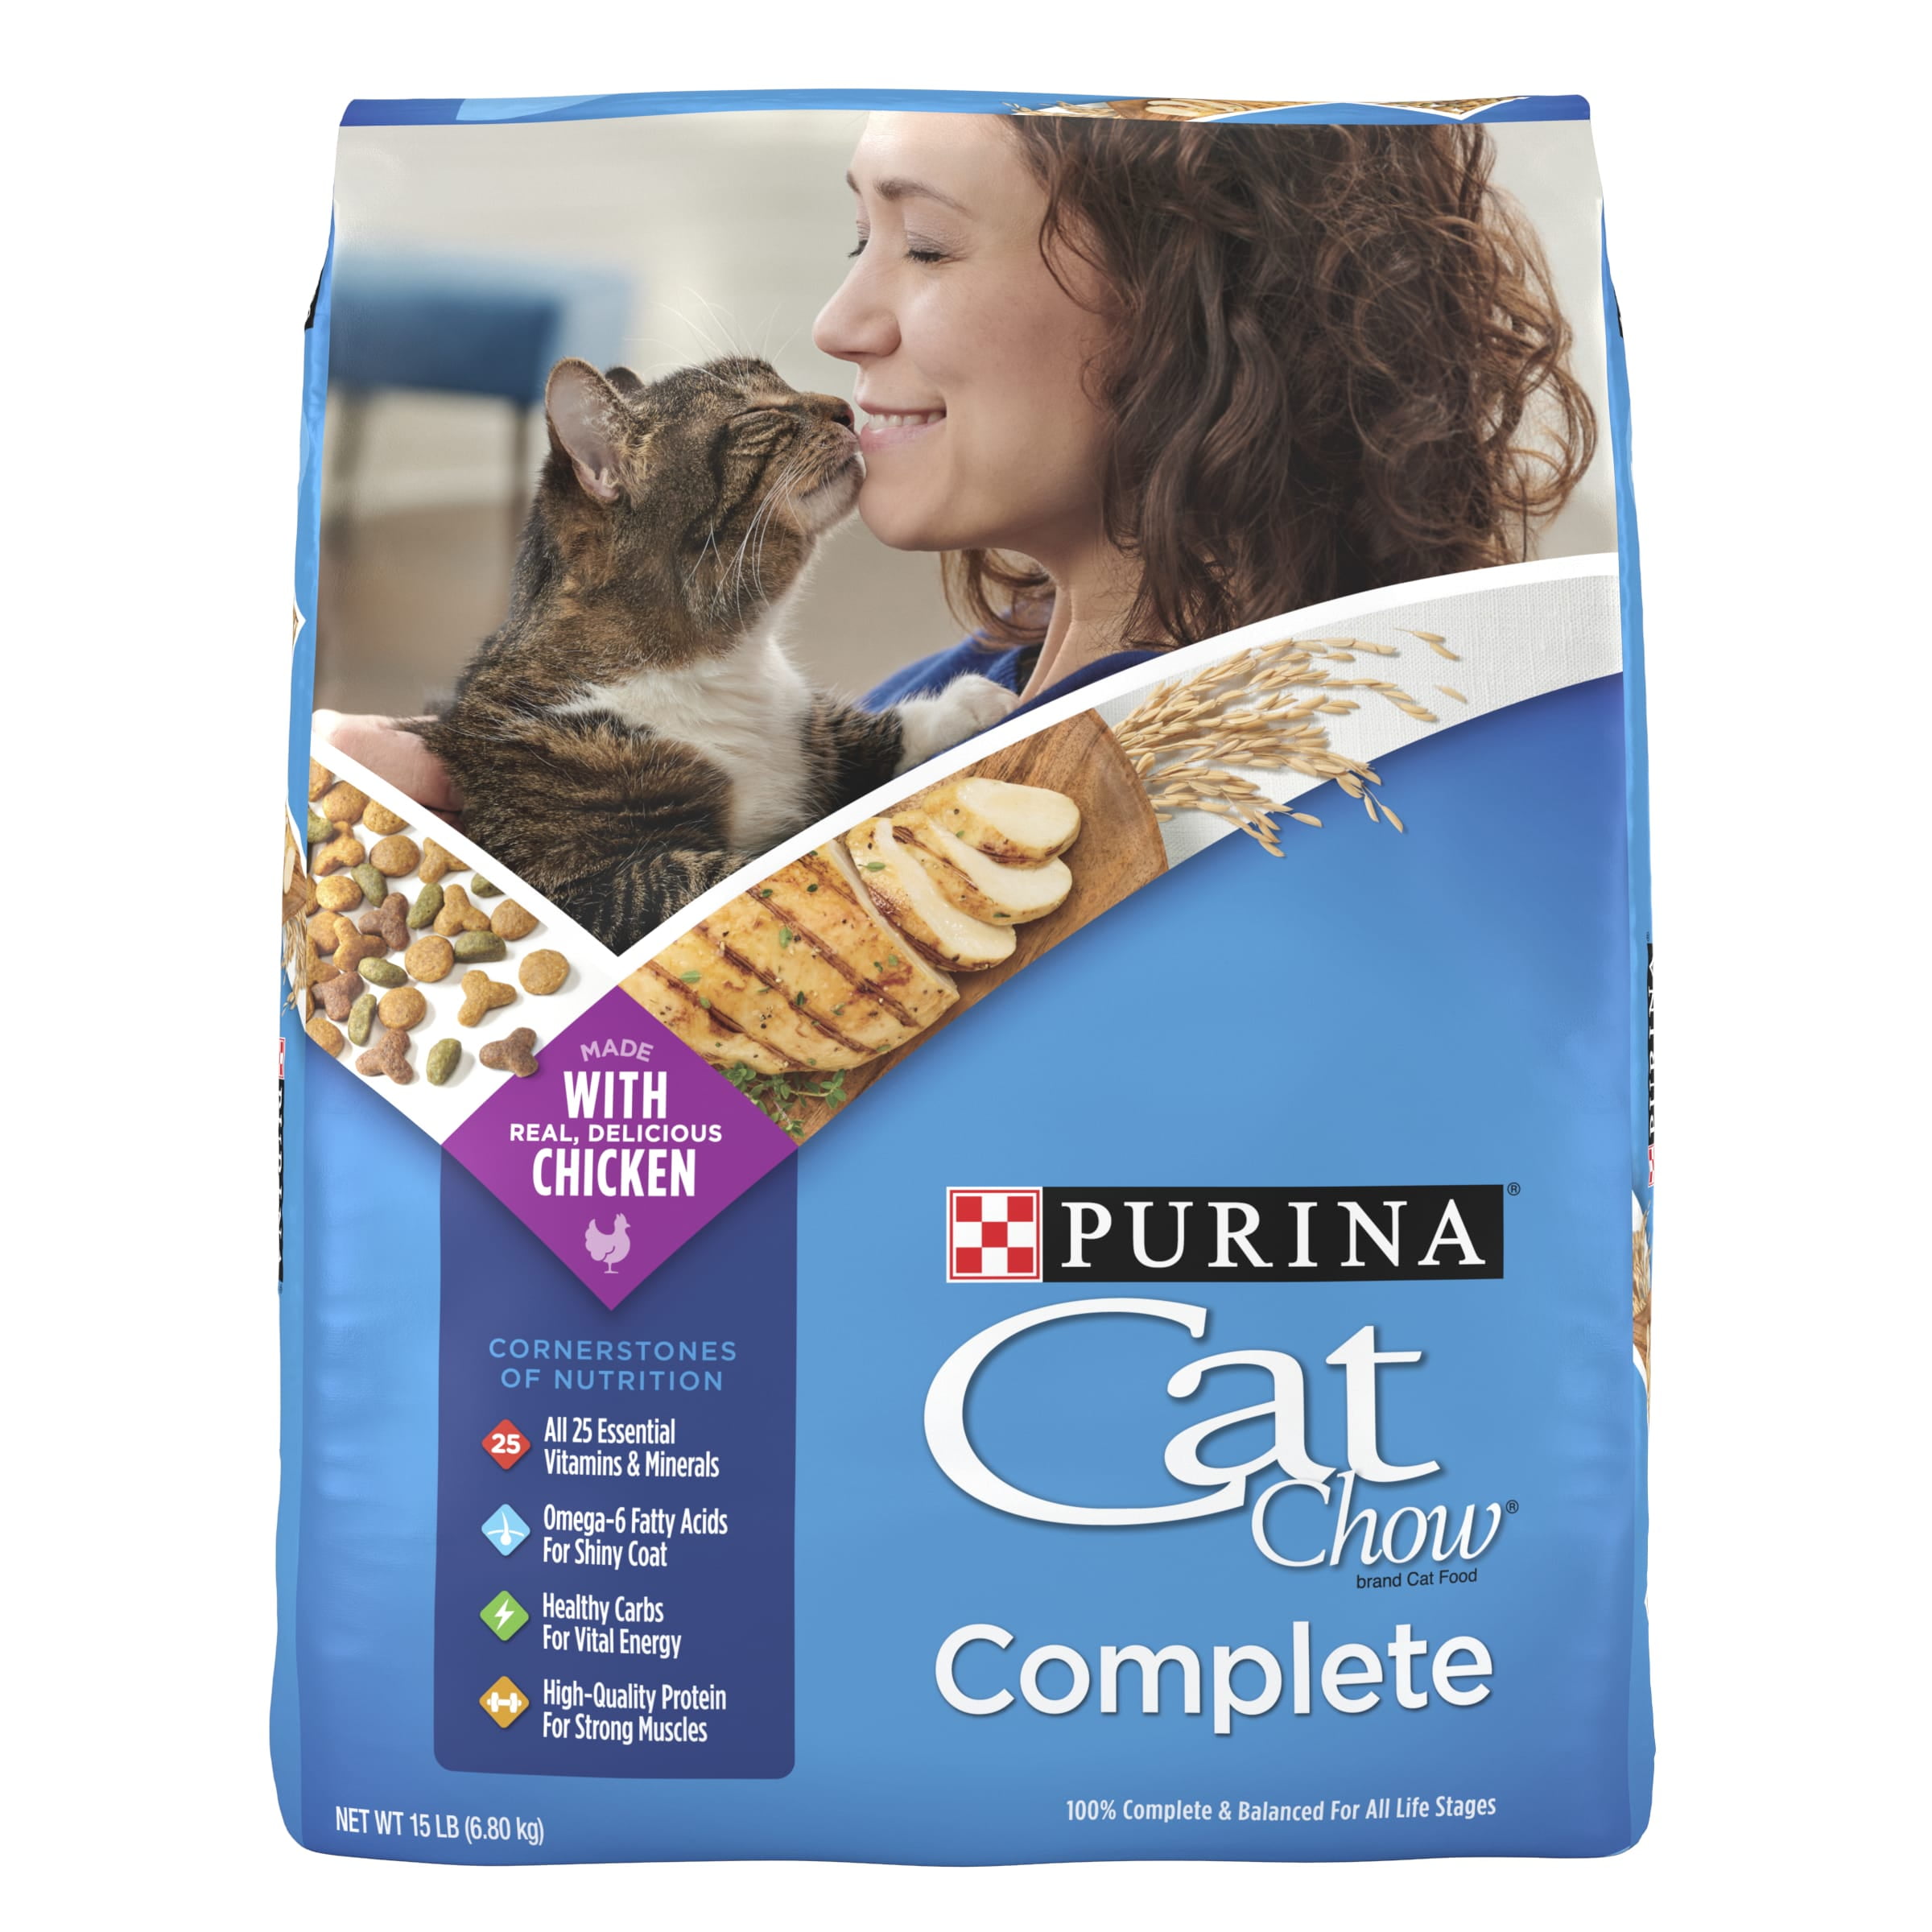 Purina Cat Chow Complete Dry Cat Food, 20 lb pic